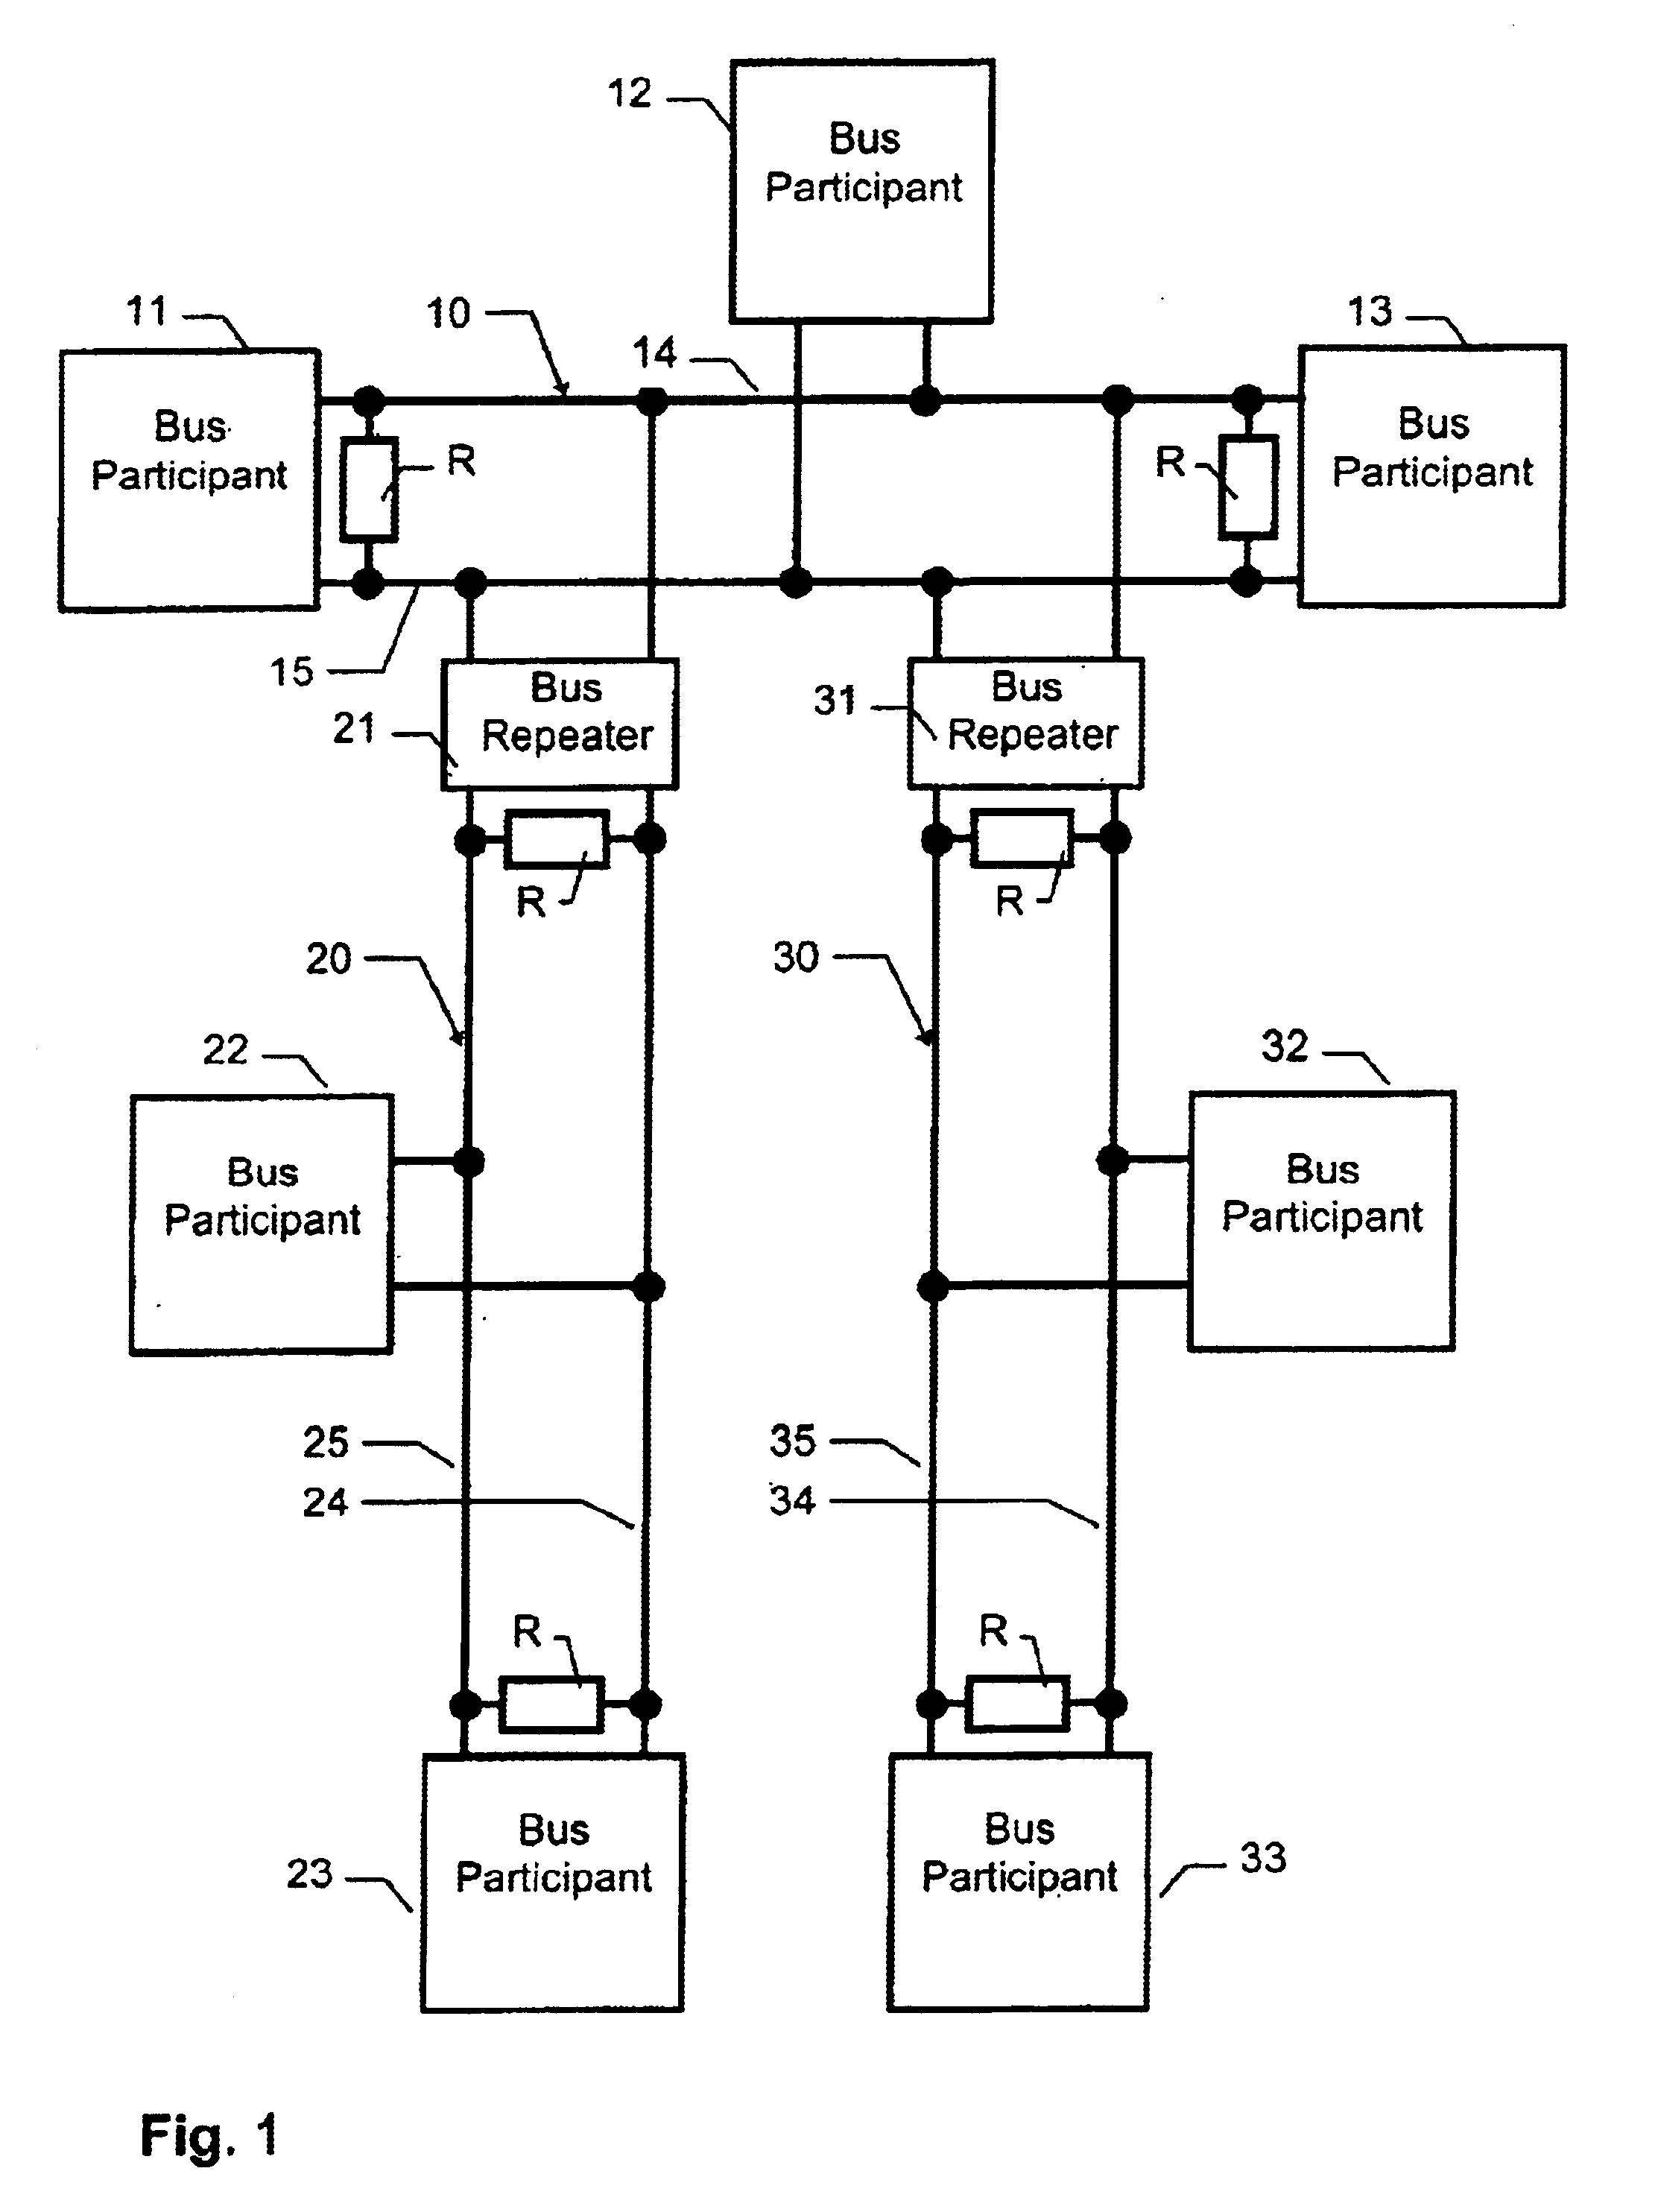 Bus repeater for coupling a first and second bus